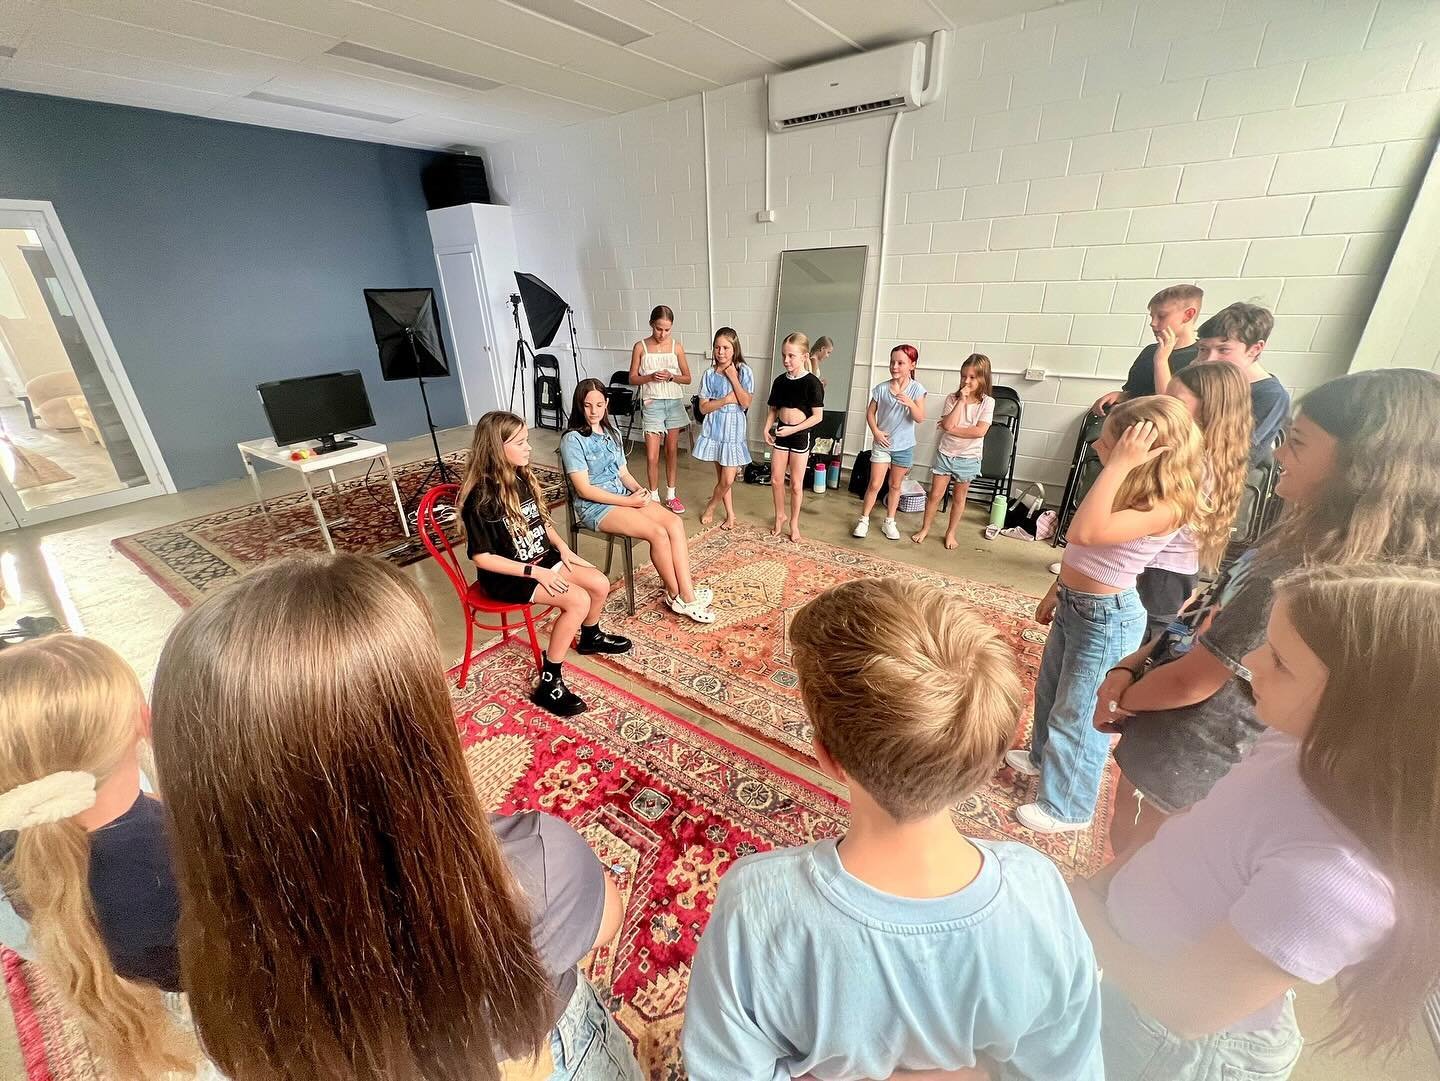 #BTS of this week&rsquo;s school holiday workshop!! ✨🎬🤩 it was a lot of fun!! We did Barbie, Wednesday, and Hunger Games scripts 🎥 

#schoolholidays #kidsacting #acting #screenacting